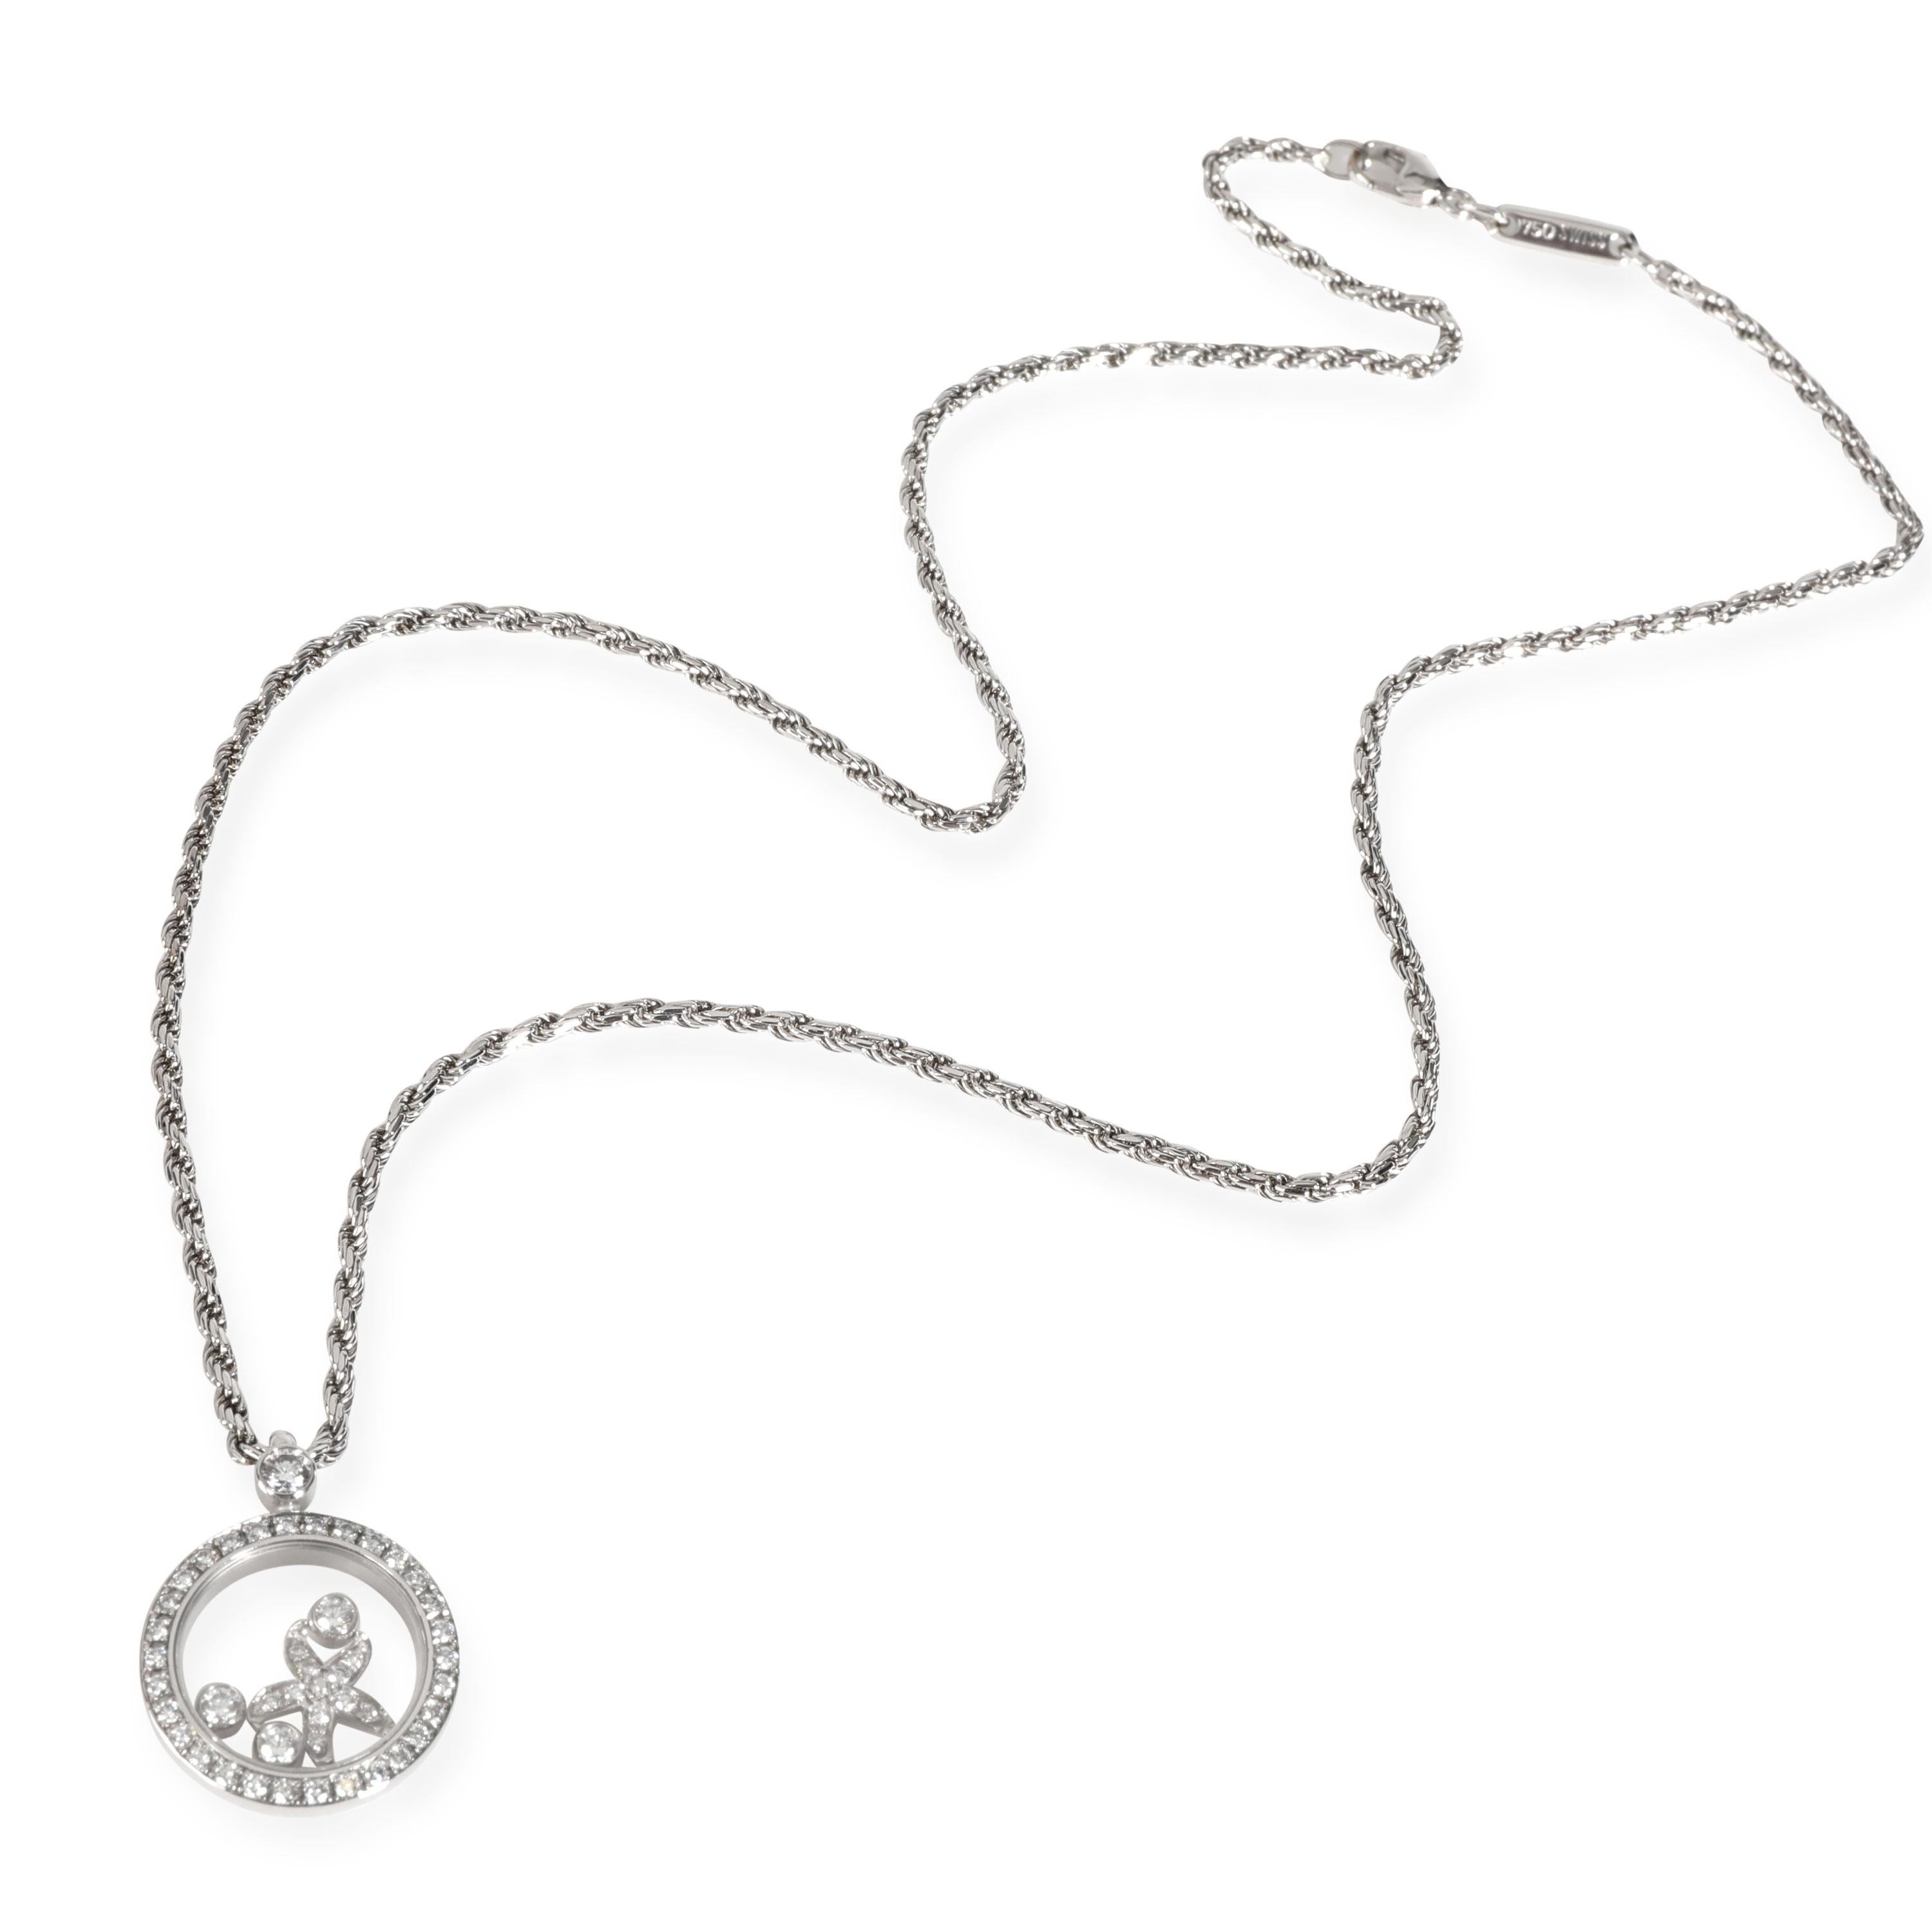 Chopard Happy Diamonds Starfish Pendant in 18K White Gold 0.5 CTW

PRIMARY DETAILS
SKU: 110865
Listing Title: Chopard Happy Diamonds Starfish Pendant in 18K White Gold 0.5 CTW
Condition Description: Retails for 12,000 USD. In excellent condition and